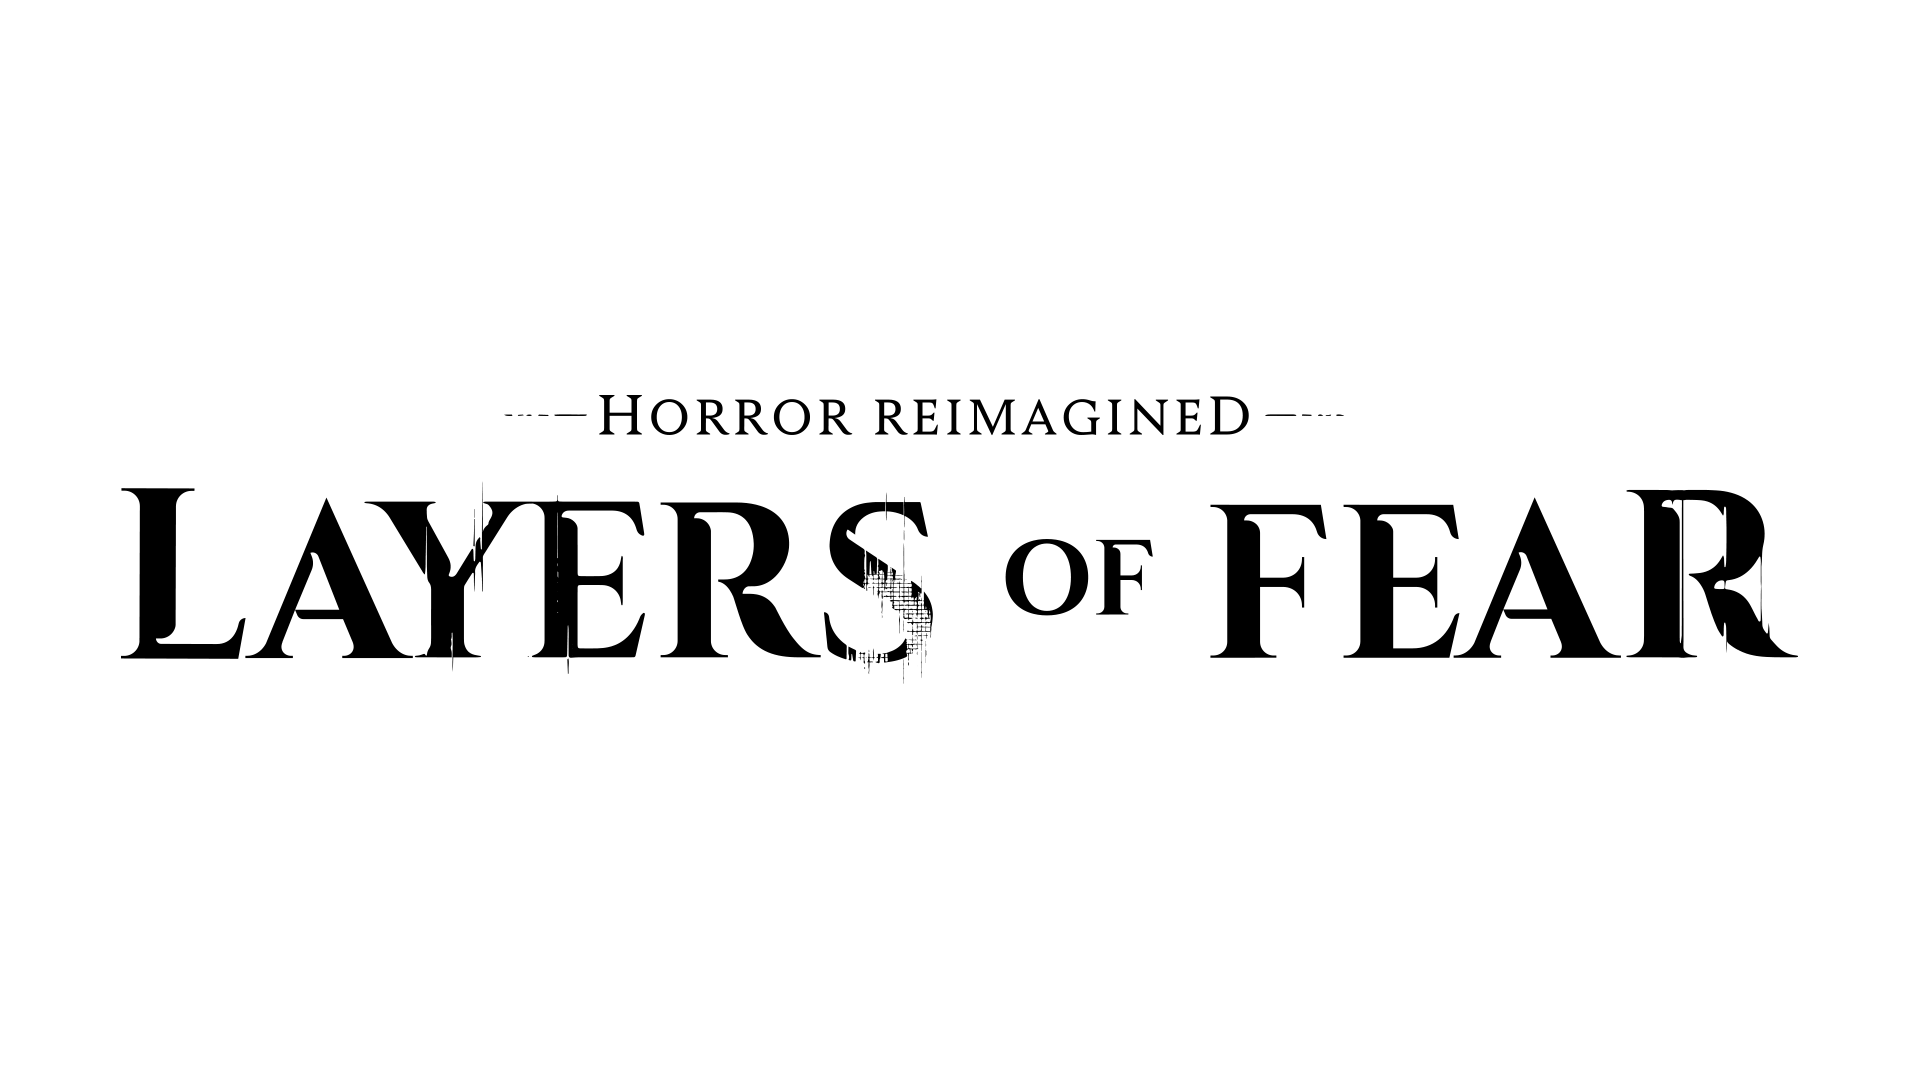 Layers of Fear - Official 11-Minute Gameplay Walkthrough 